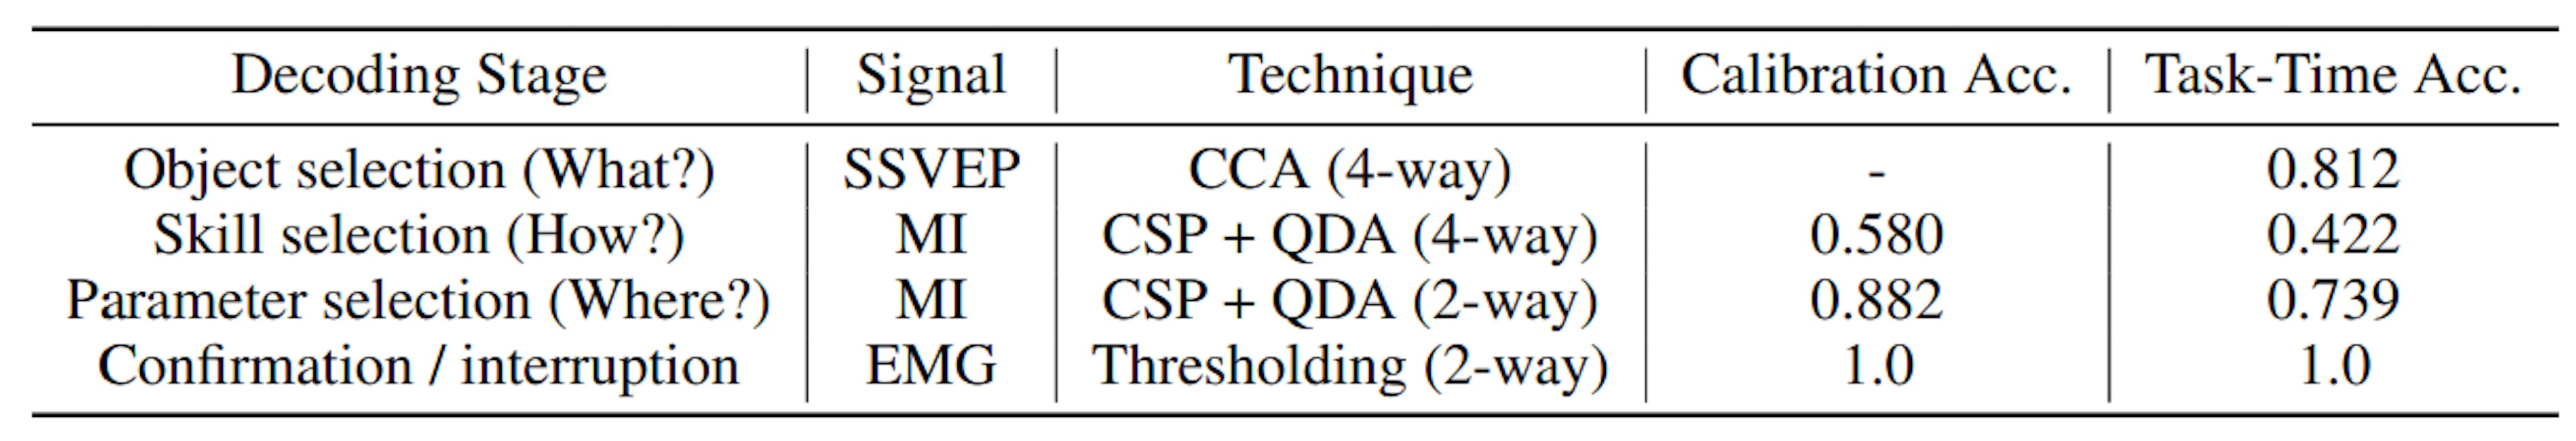 Table 2: Decoding accuracy at different stages of the experiment.